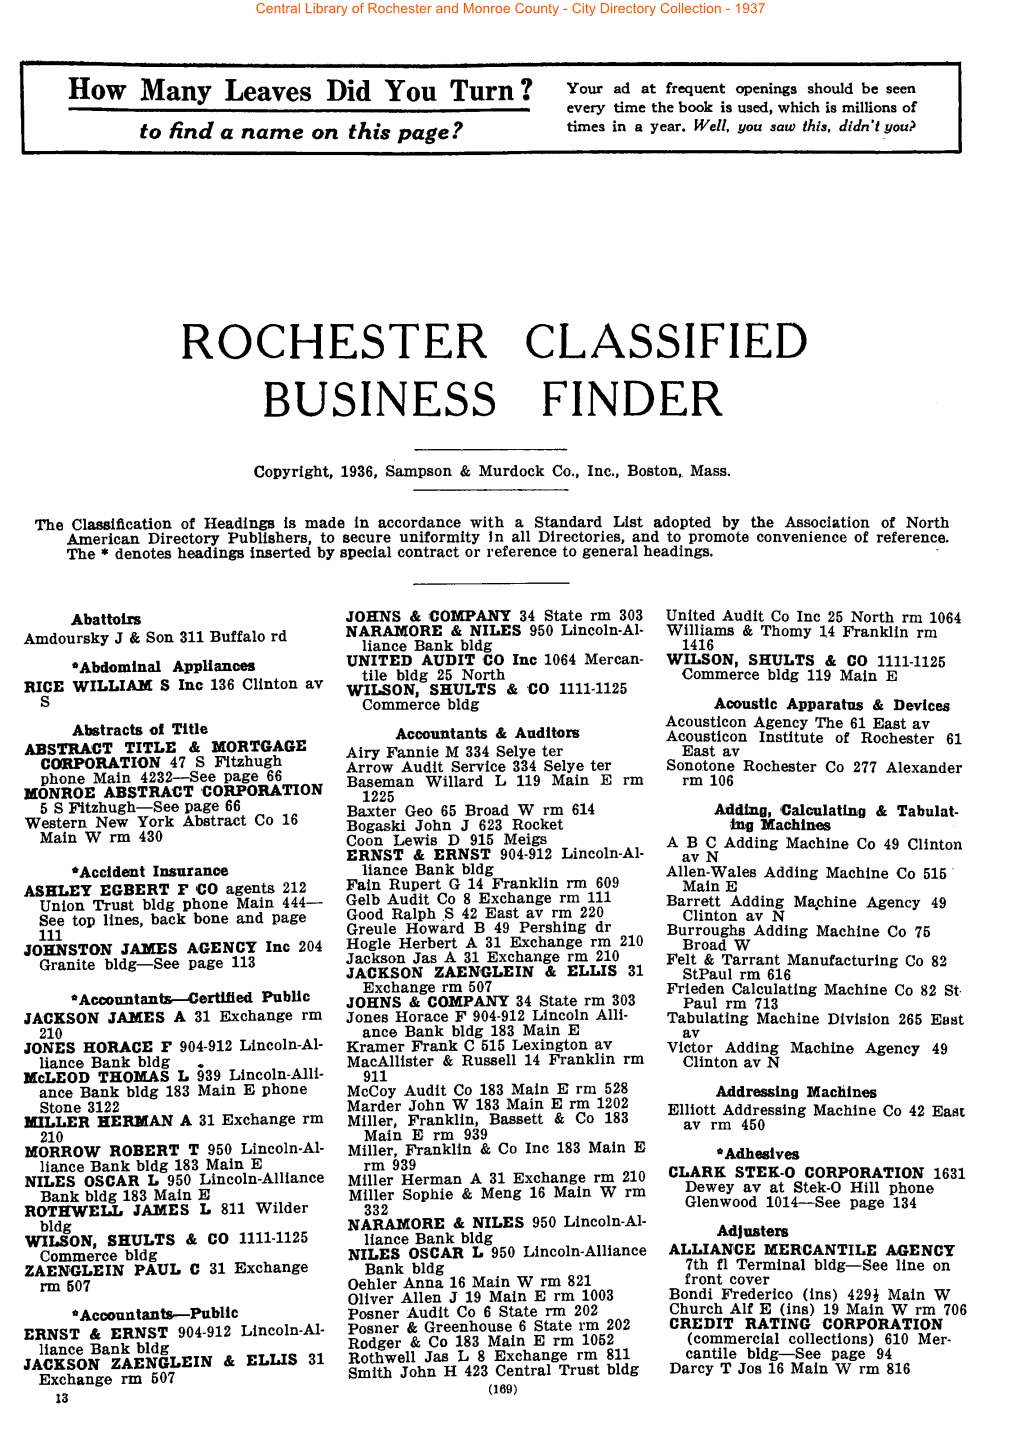 Rochester Classified Business Finder